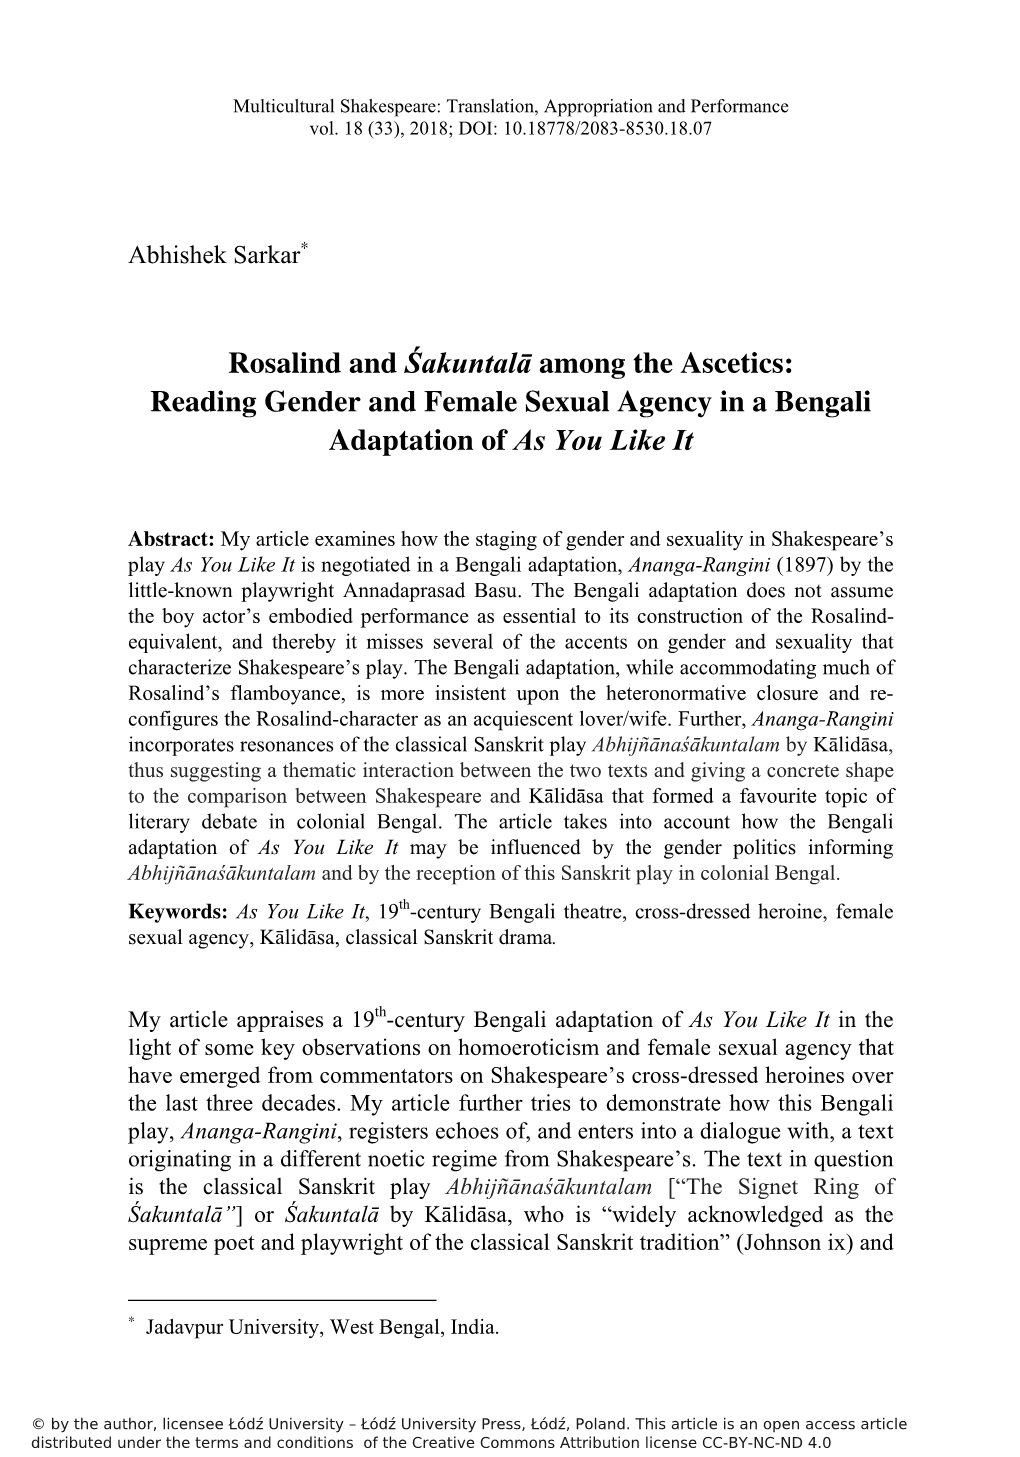 Rosalind and Śakuntalā Among the Ascetics: Reading Gender and Female Sexual Agency in a Bengali Adaptation of As You Like It